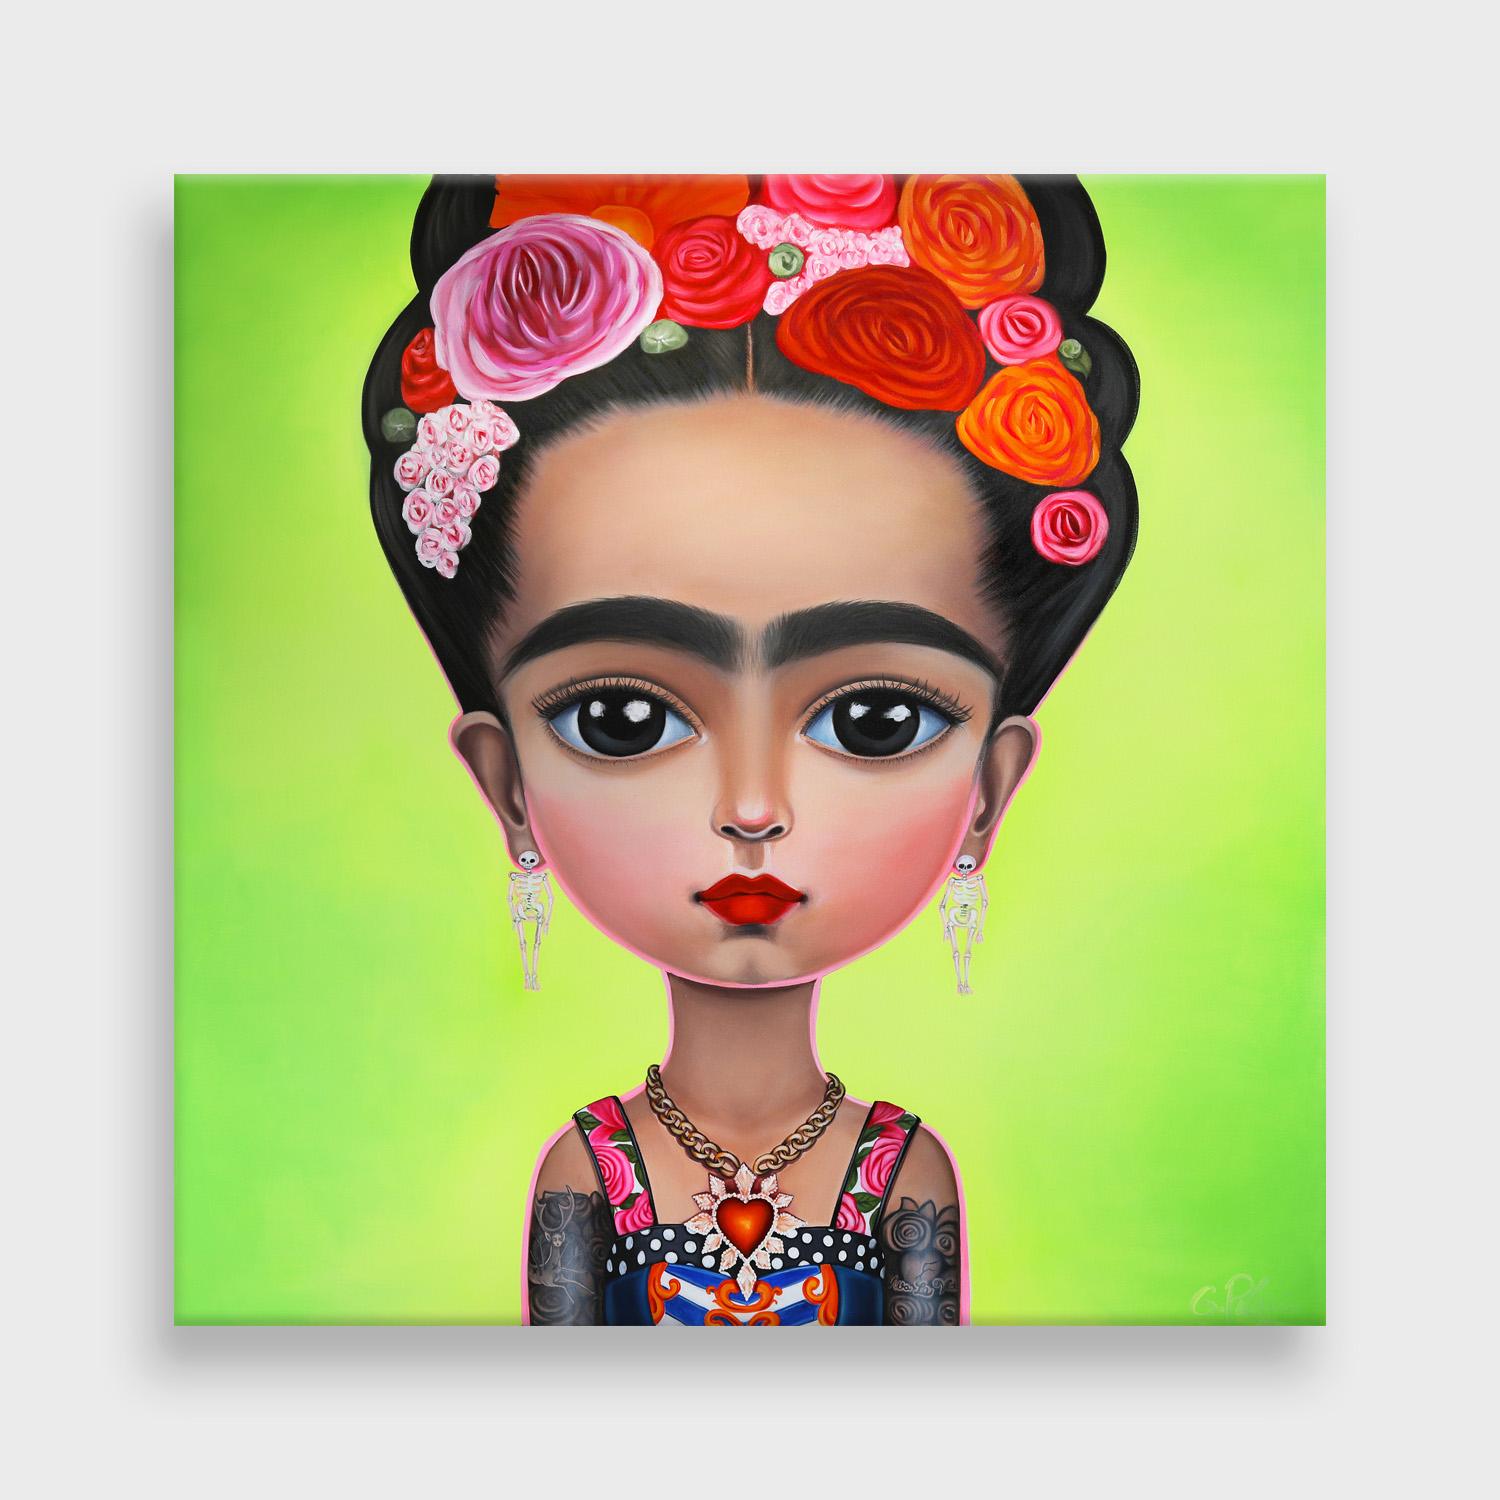 Pop Art Style Portrait of Frida Kahlo  - Painting by Gina Palmerin